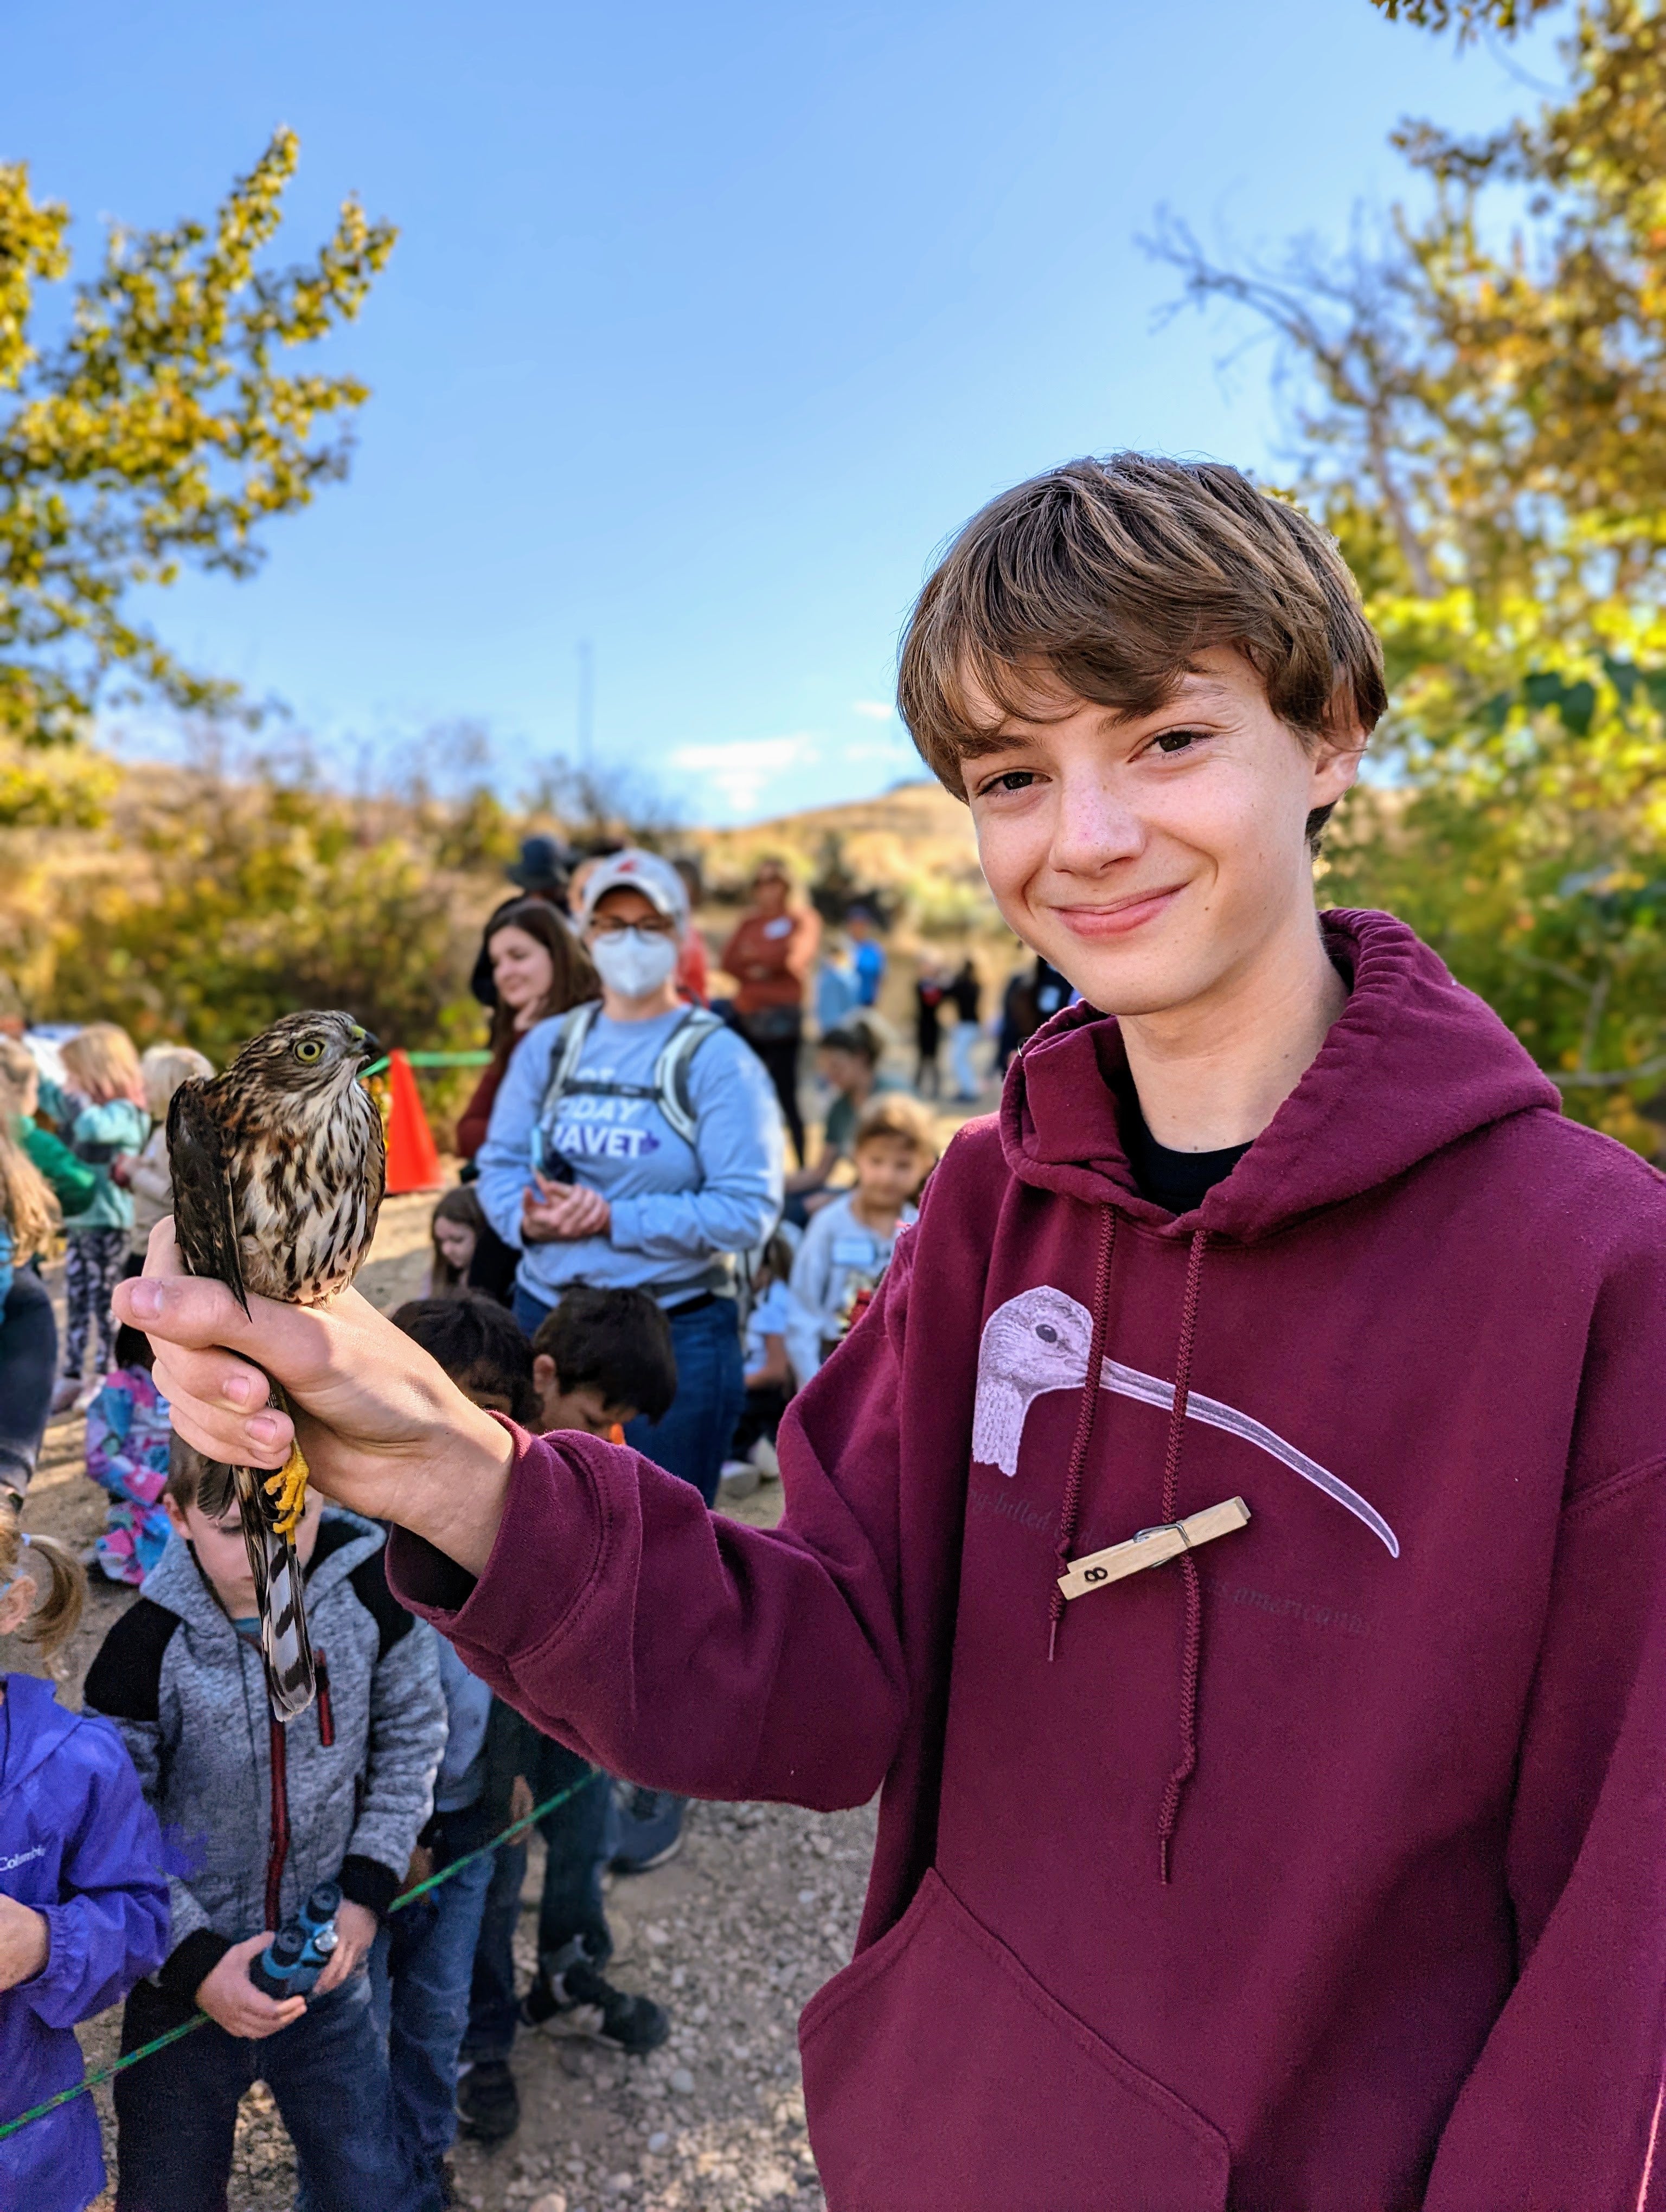 a high school student wearing an IBO sweatshirt is smiling while he holds a small brown streaked hawk. A crowd of small children and parents stands in the background